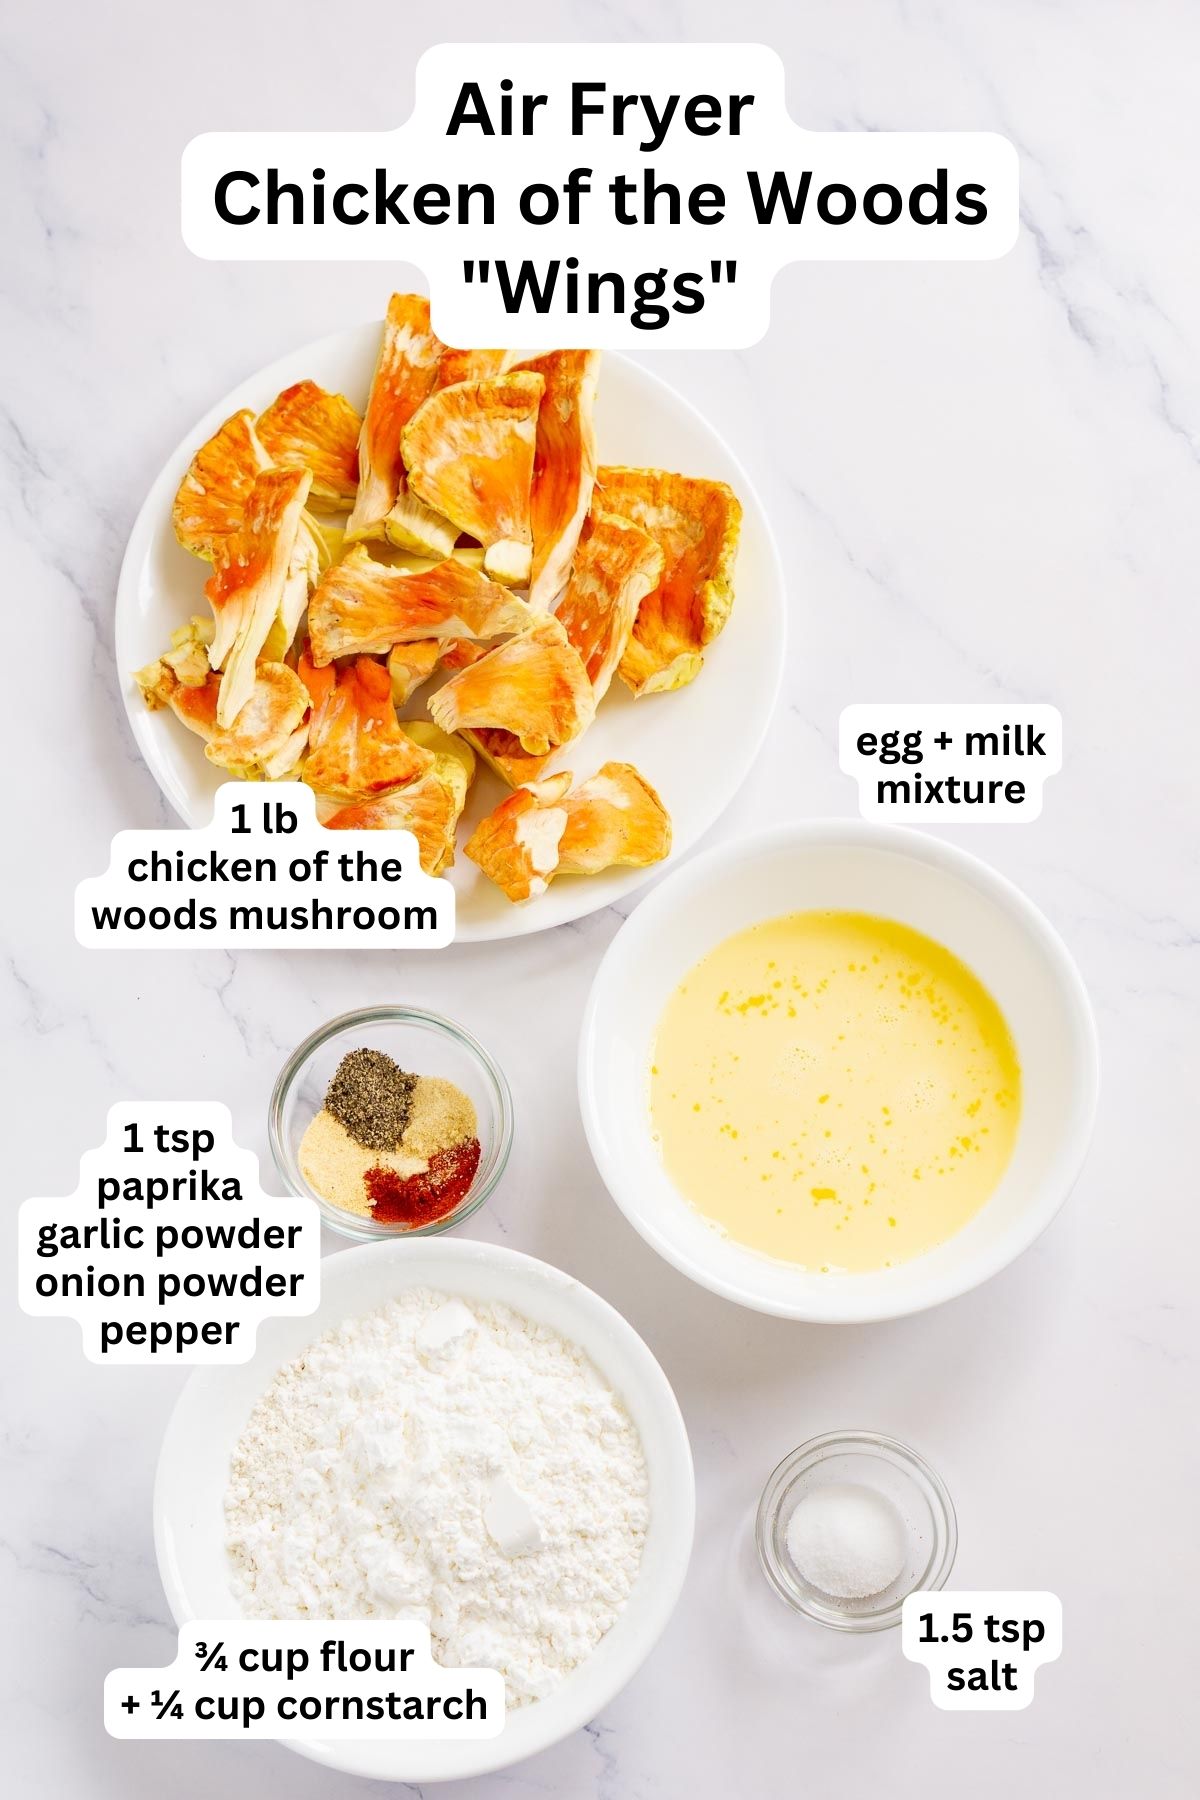 Ingredients to make Chicken of the Woods "Wings"